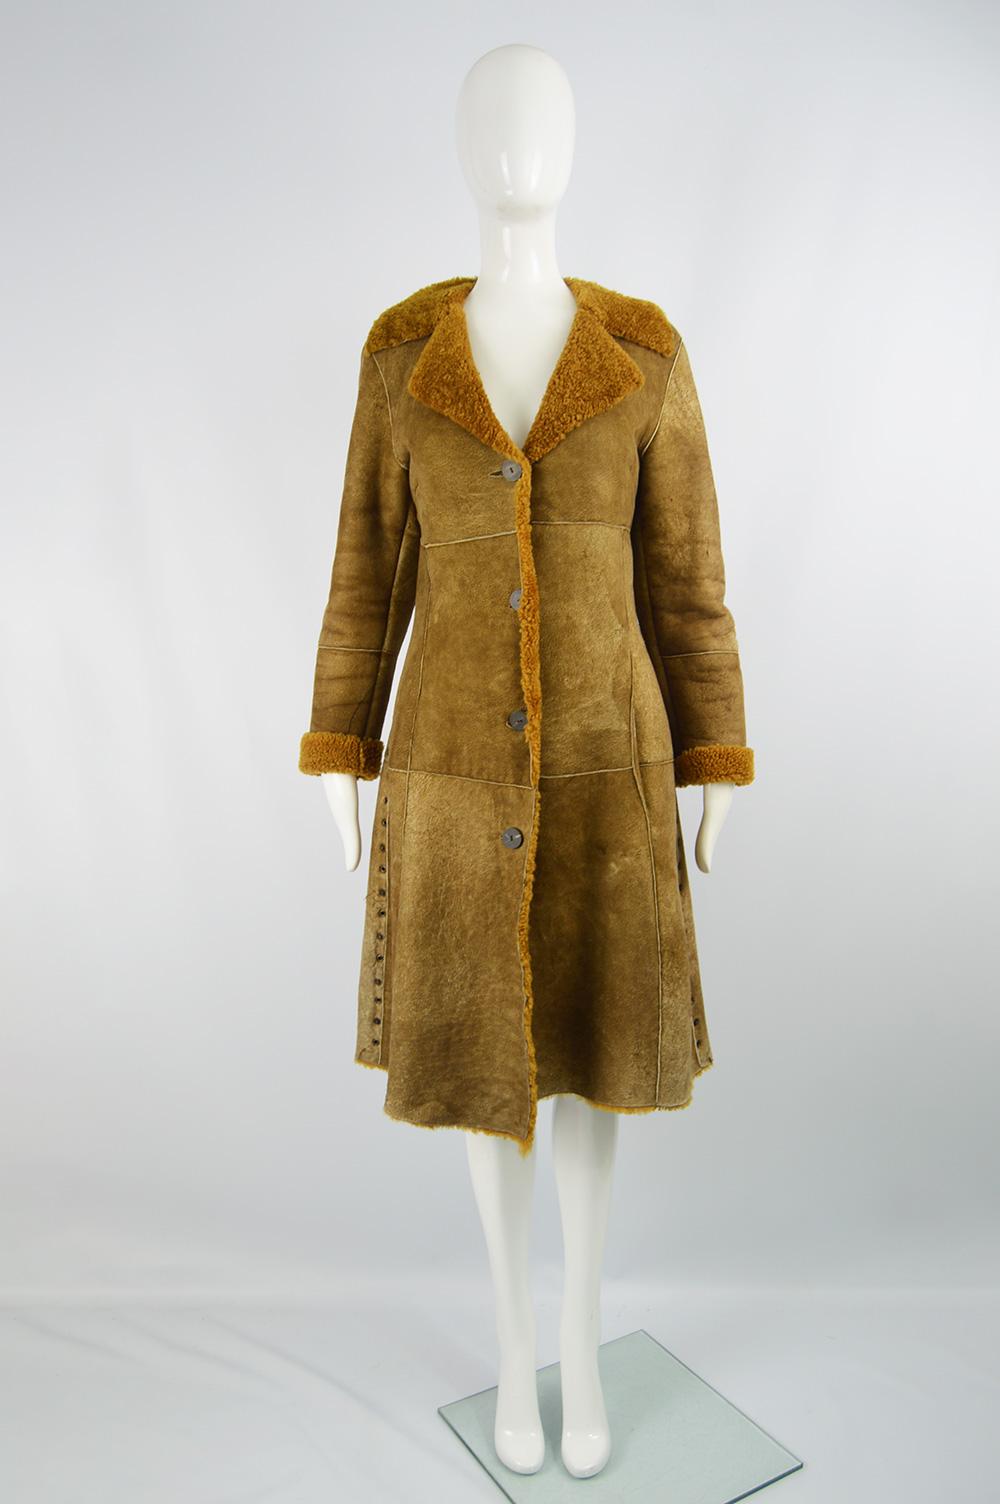 A fabulous vintage Dolce & Gabbana D&G womens sheepskin suede coat with a brown shearling lining and stud details. It has a distressed effect to the exterior and is perfect for autumn winter. 

Size: Marked S. Please check measurements. 
Bust - 34”